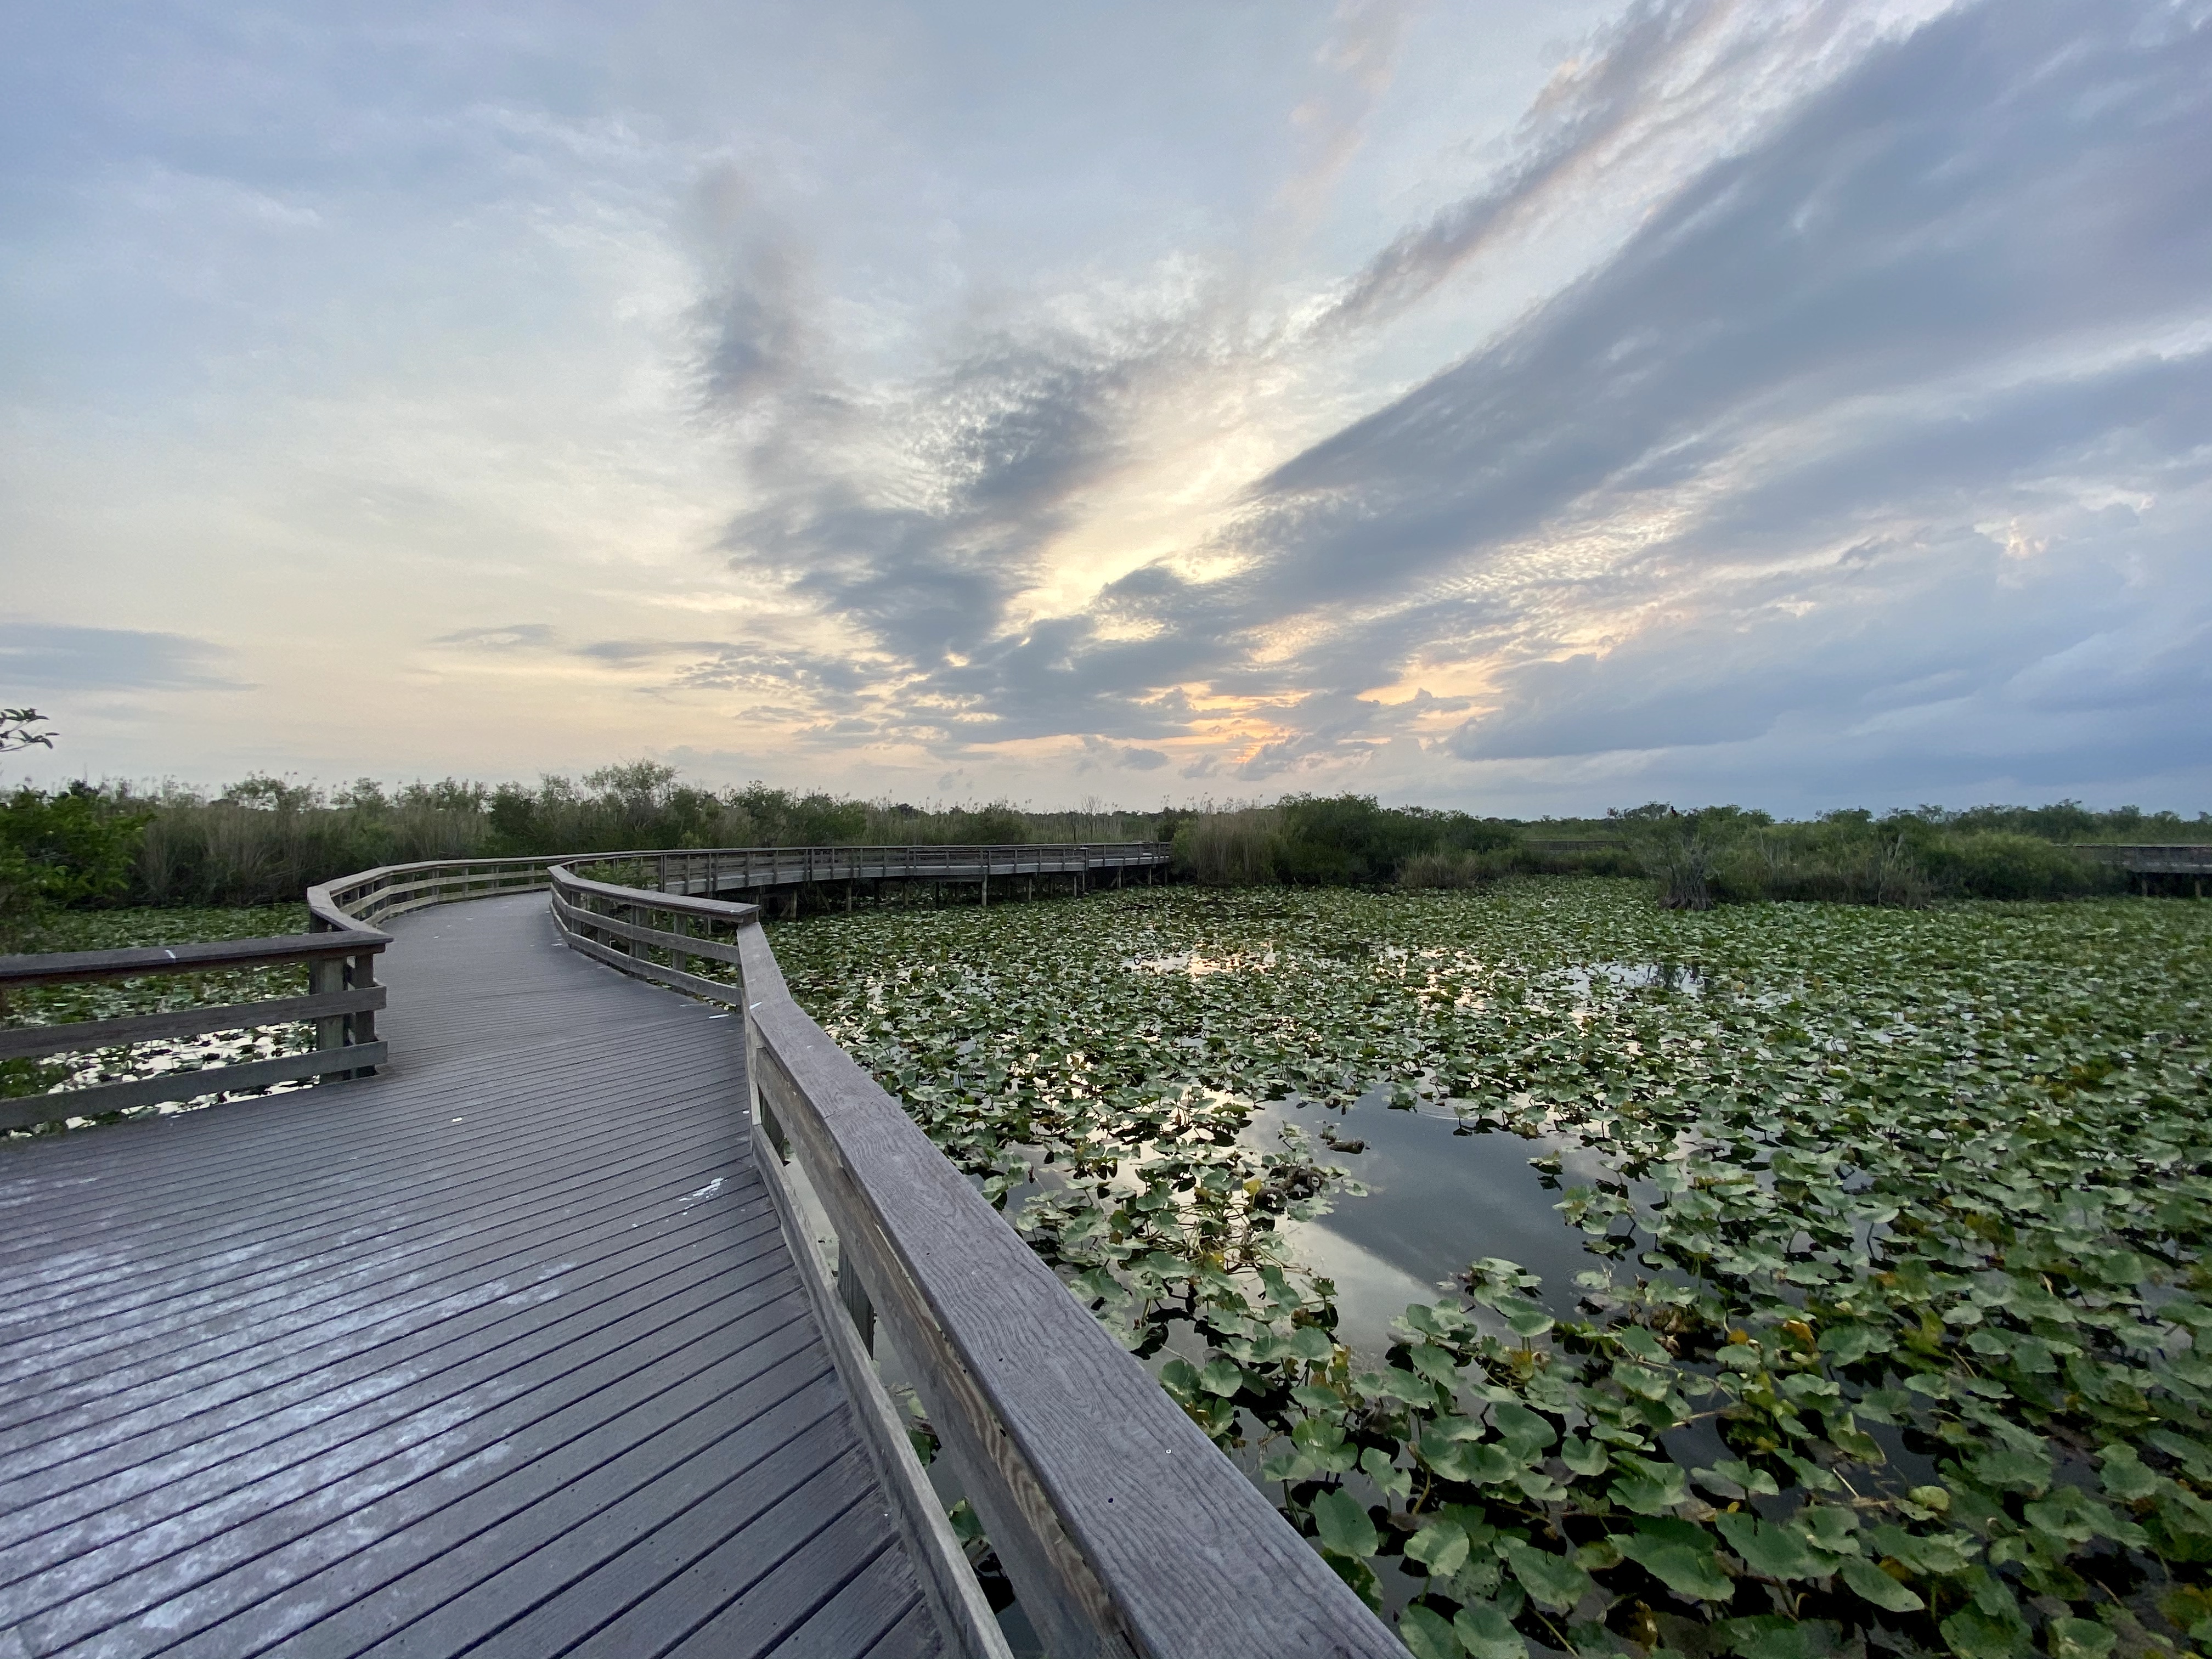 A partial cloudy sky obscures the sun as it sets over the Anhinga Trail boardwalk on the left. The water to the right of the boardwalk is covered by floating vegetation called spatterdock.